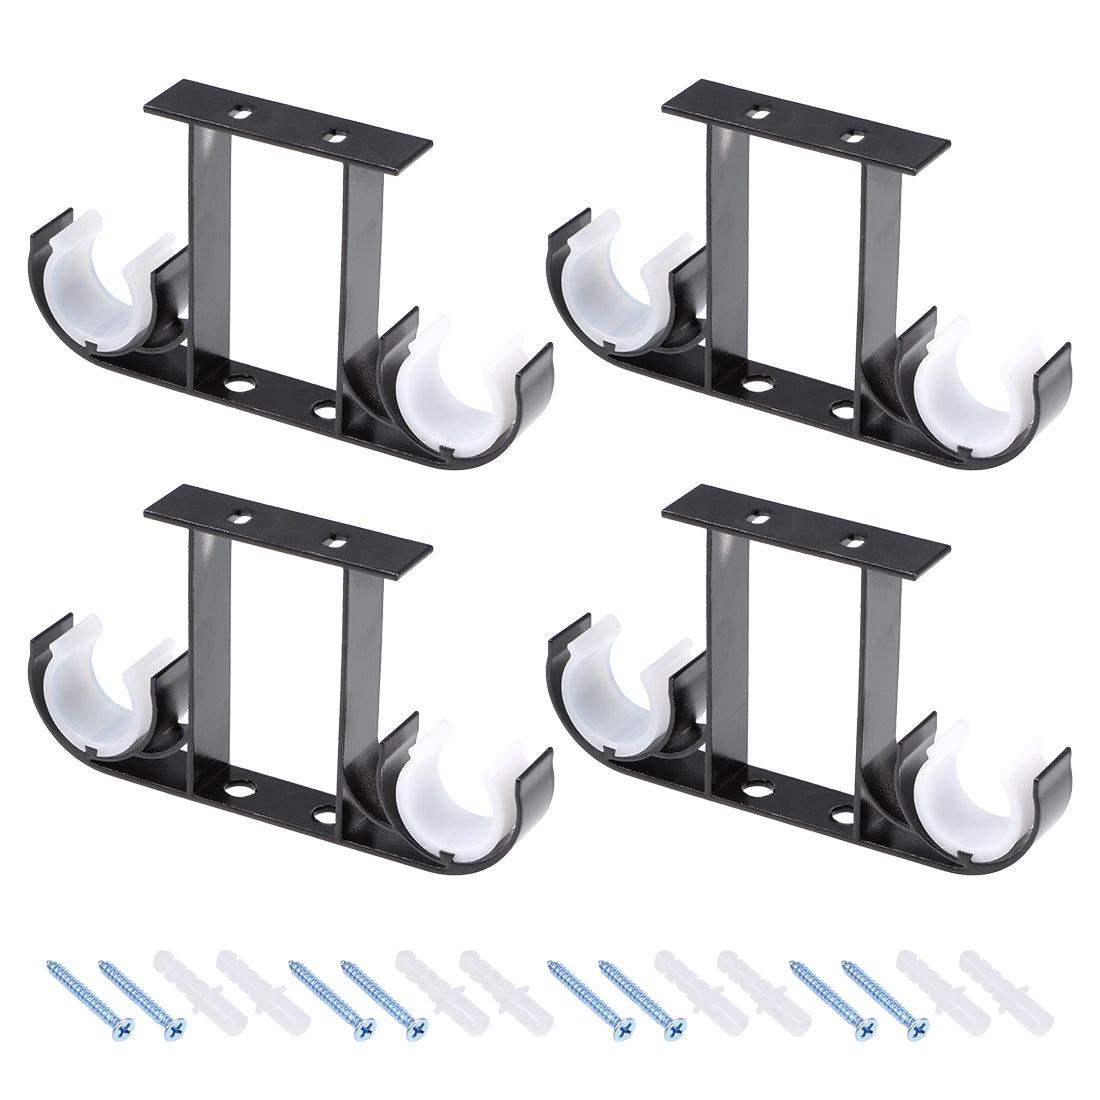 uxcell Uxcell Curtain Rod Bracket Aluminum Alloy Double Holder Support for 26mm - 29mm Drapery Rod, 140 x 80 x 19mm Black 4 Pcs